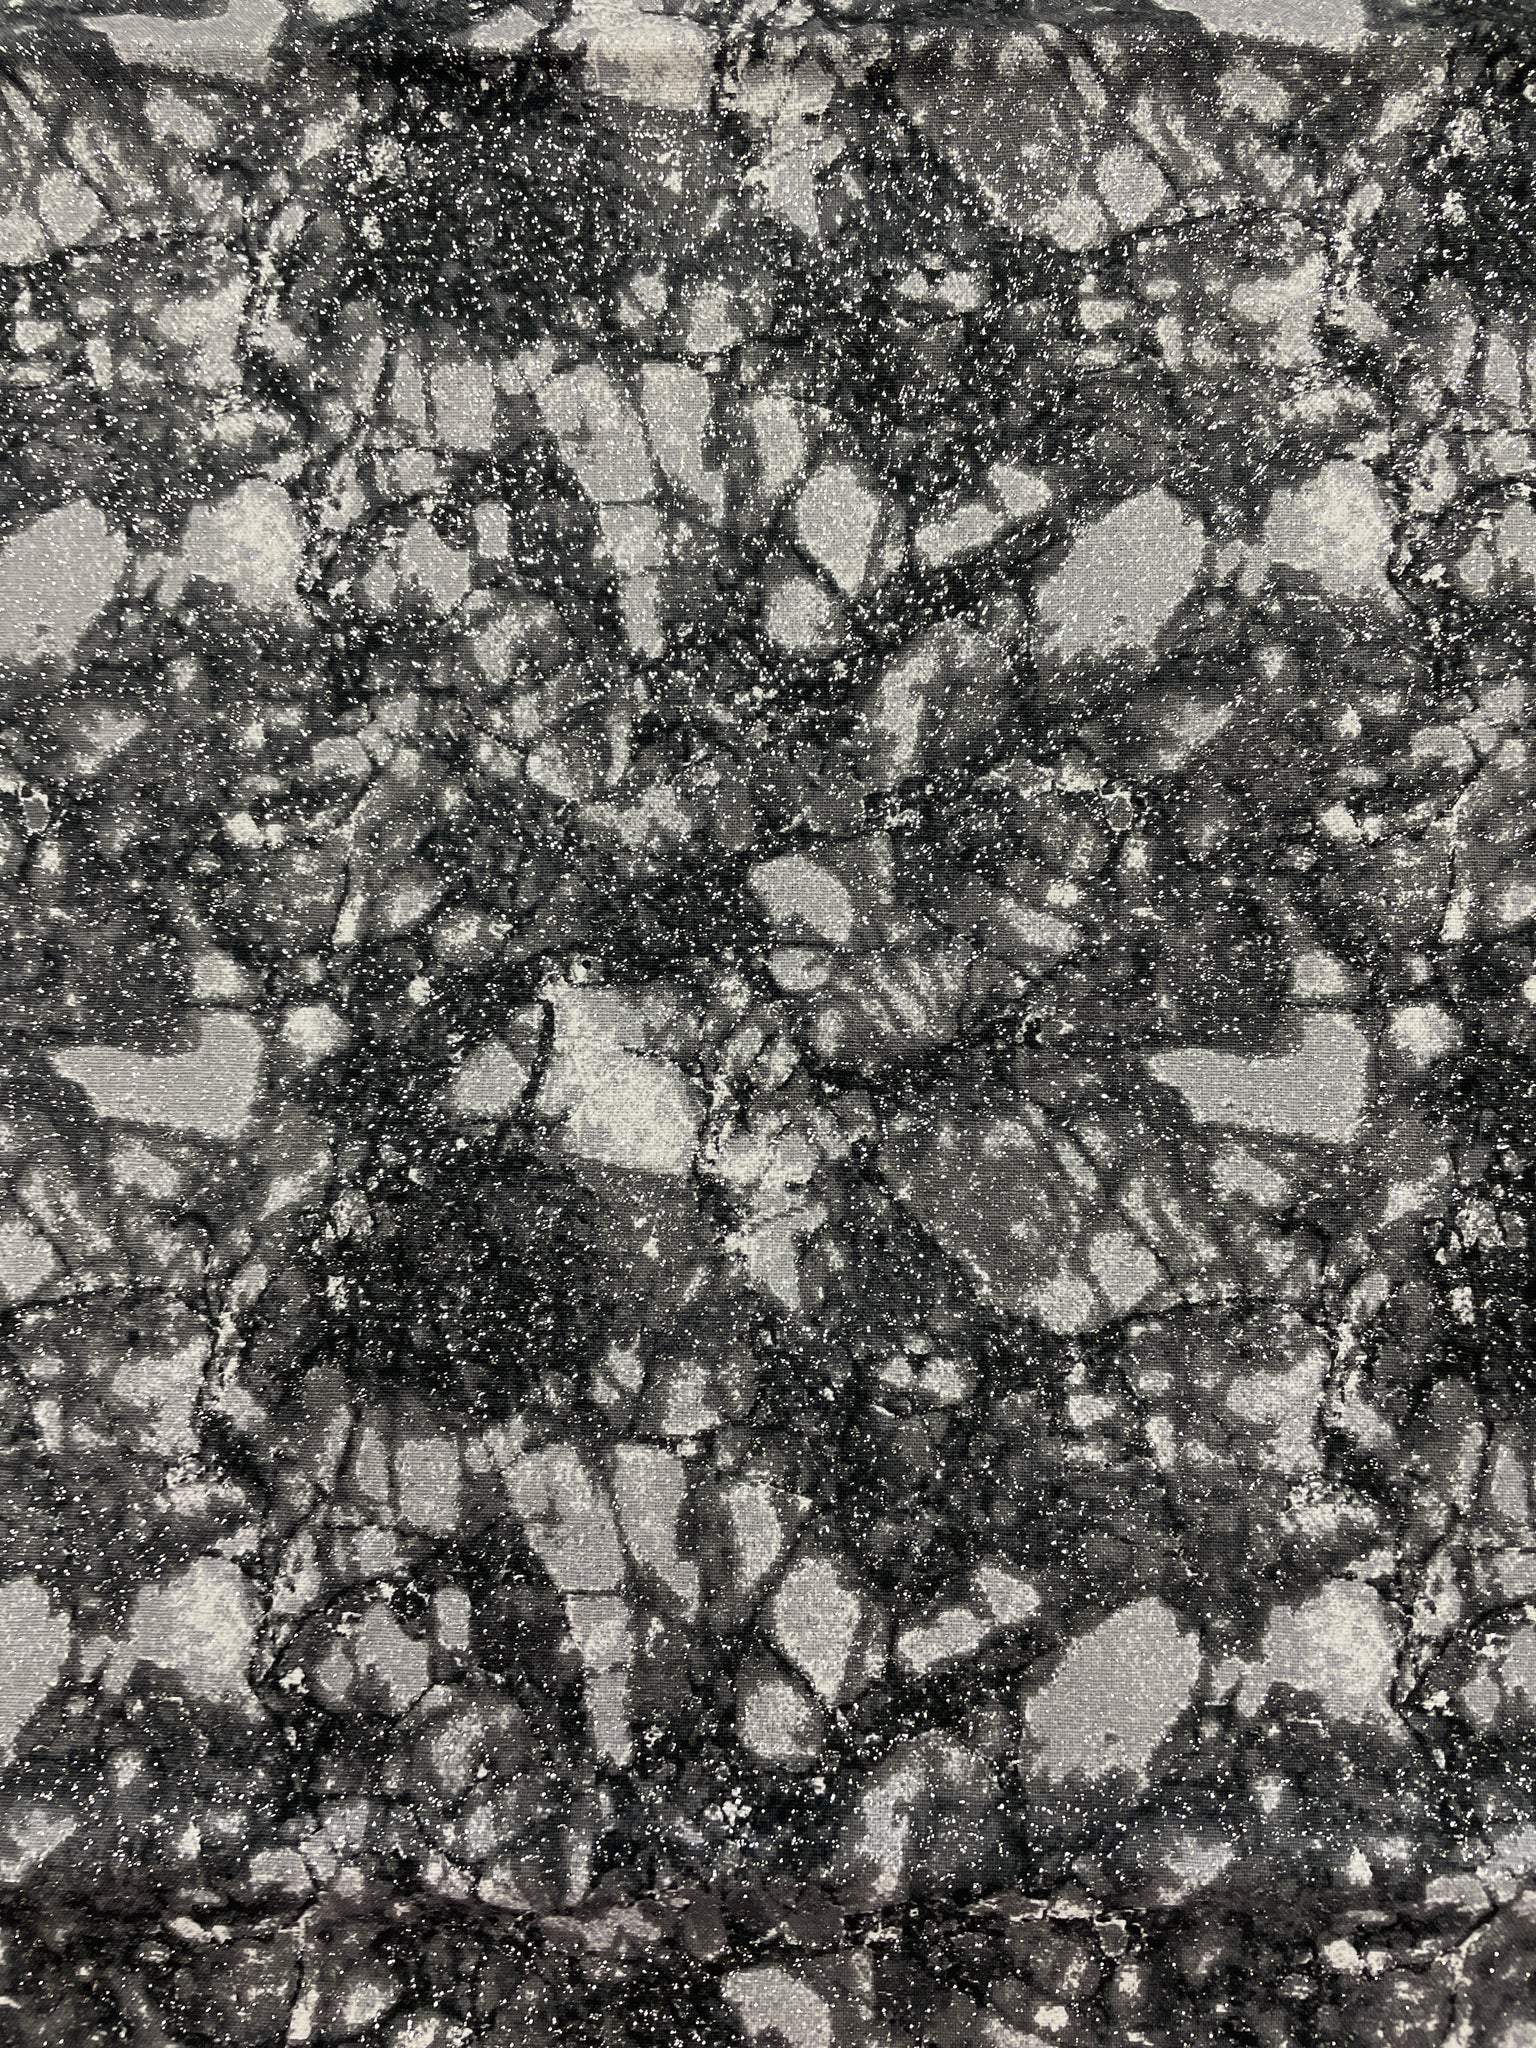 1 YD Quilting Cotton - Mottled Black and Grays with Silver Glitter